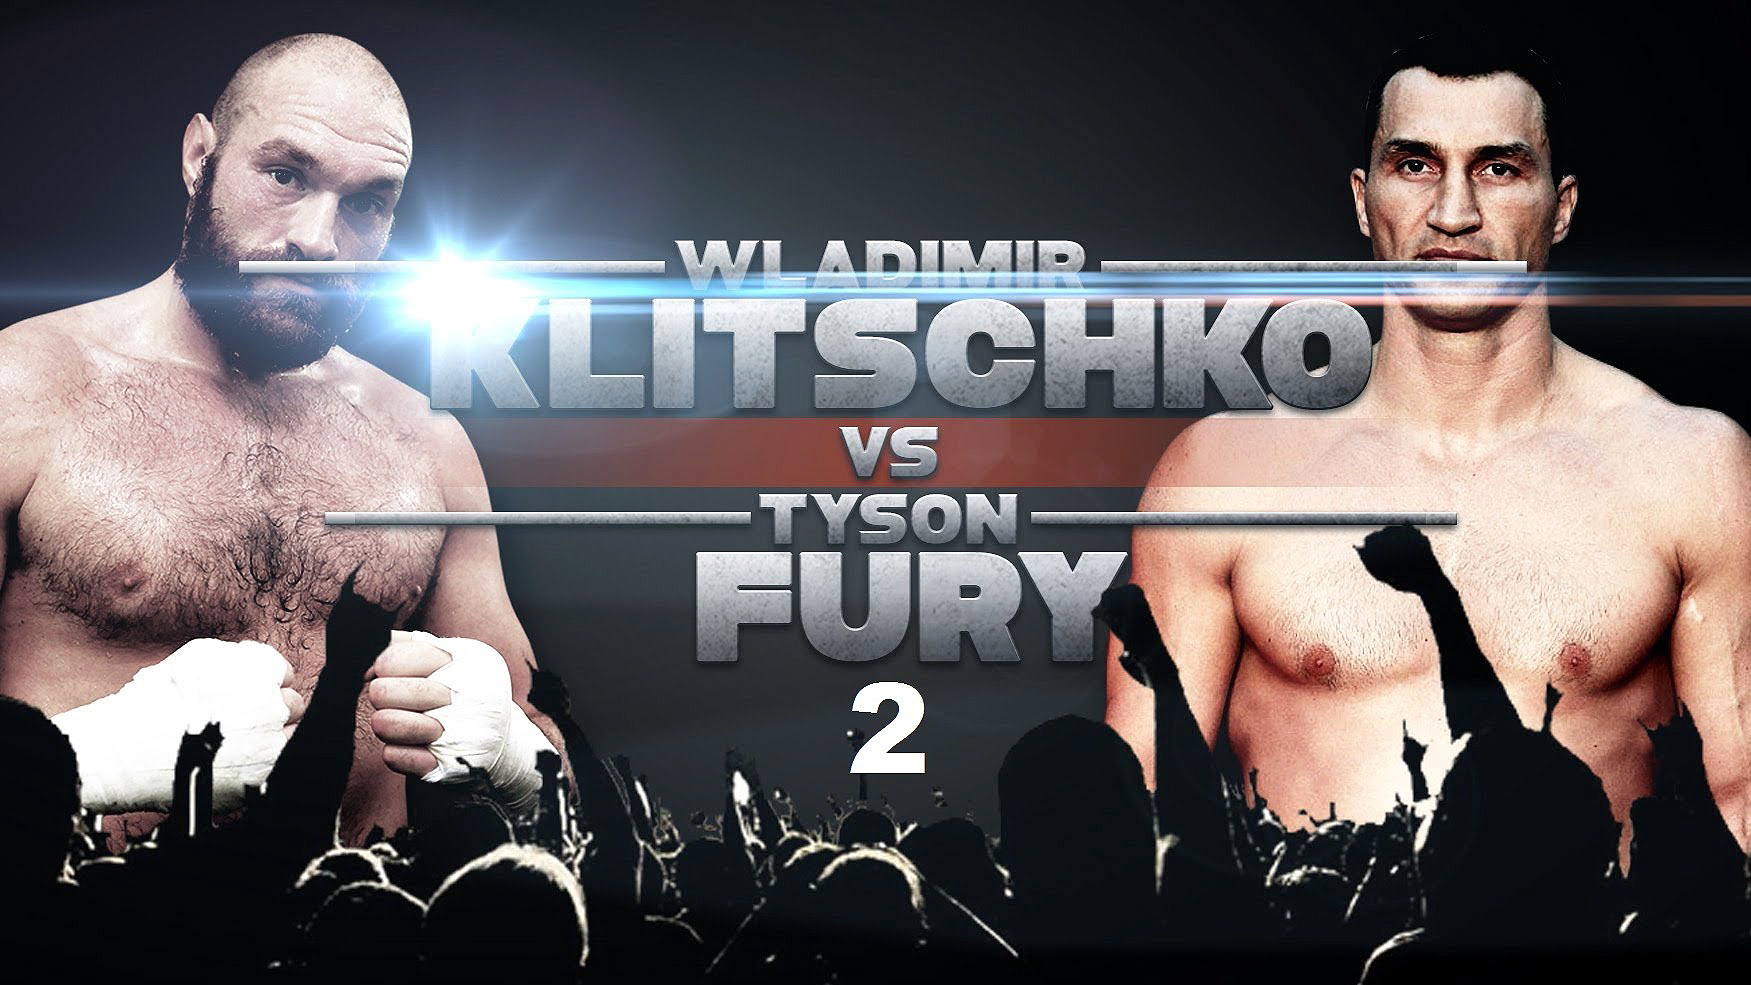 An ankle injury has forced the WBA/WBO/IBO heavyweight champ from fighting Klitschko as scheduled.